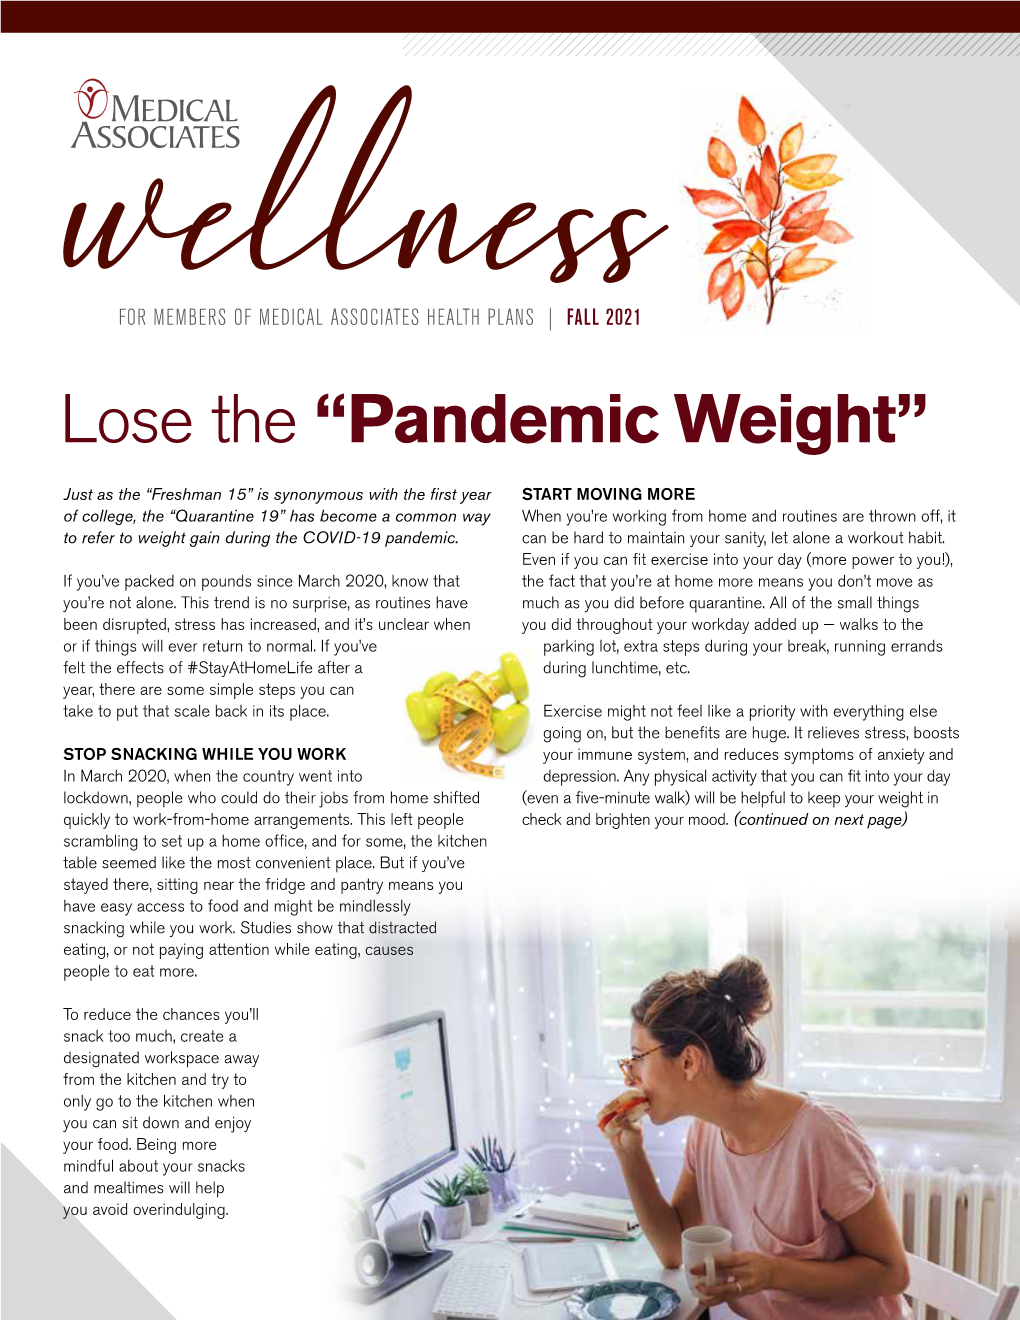 Lose the “Pandemic Weight”